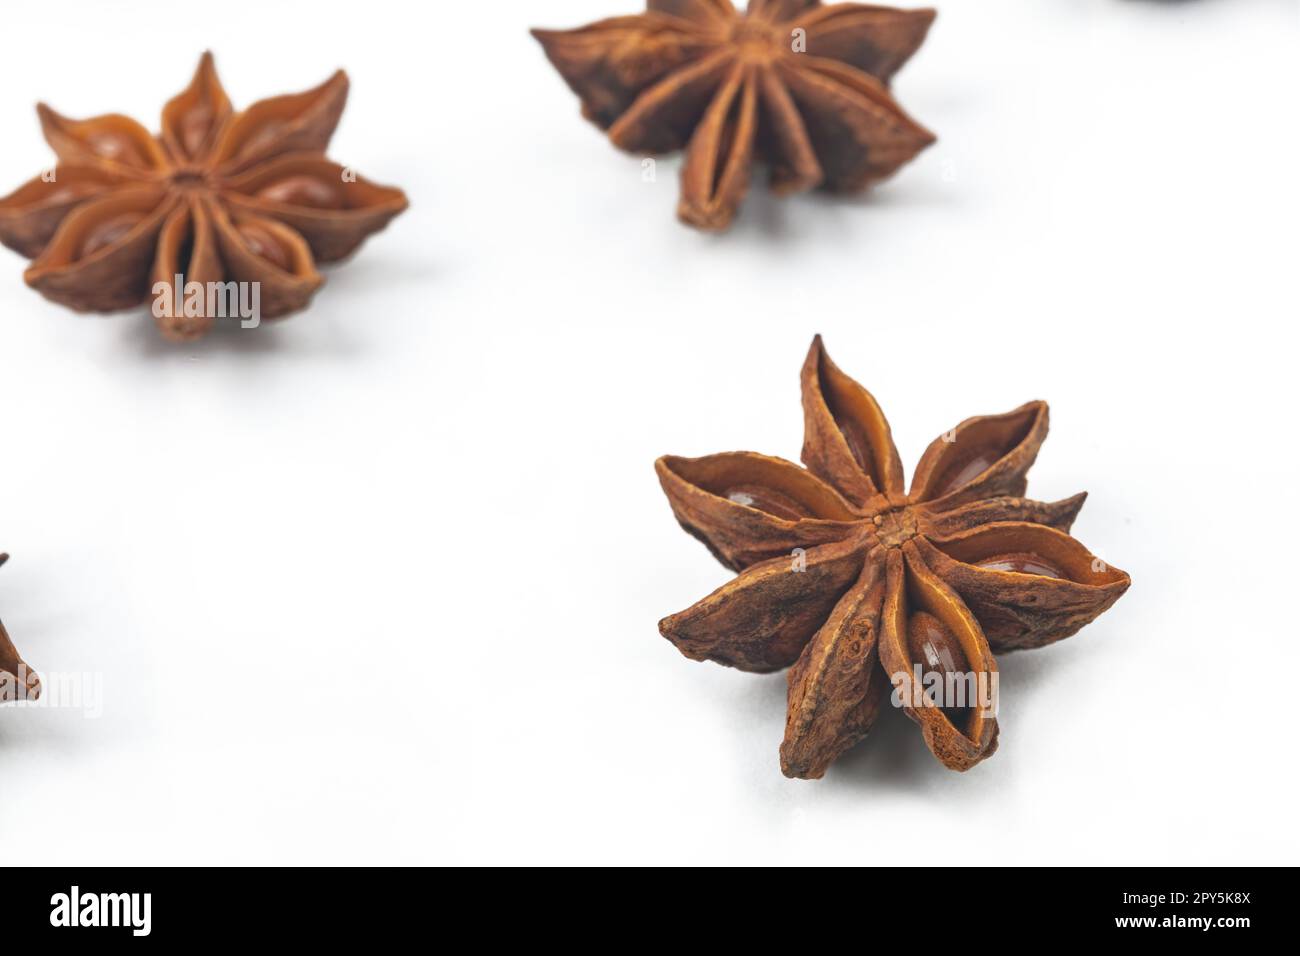 Detail from Anise ingredient with depth of field isolated over white background Stock Photo